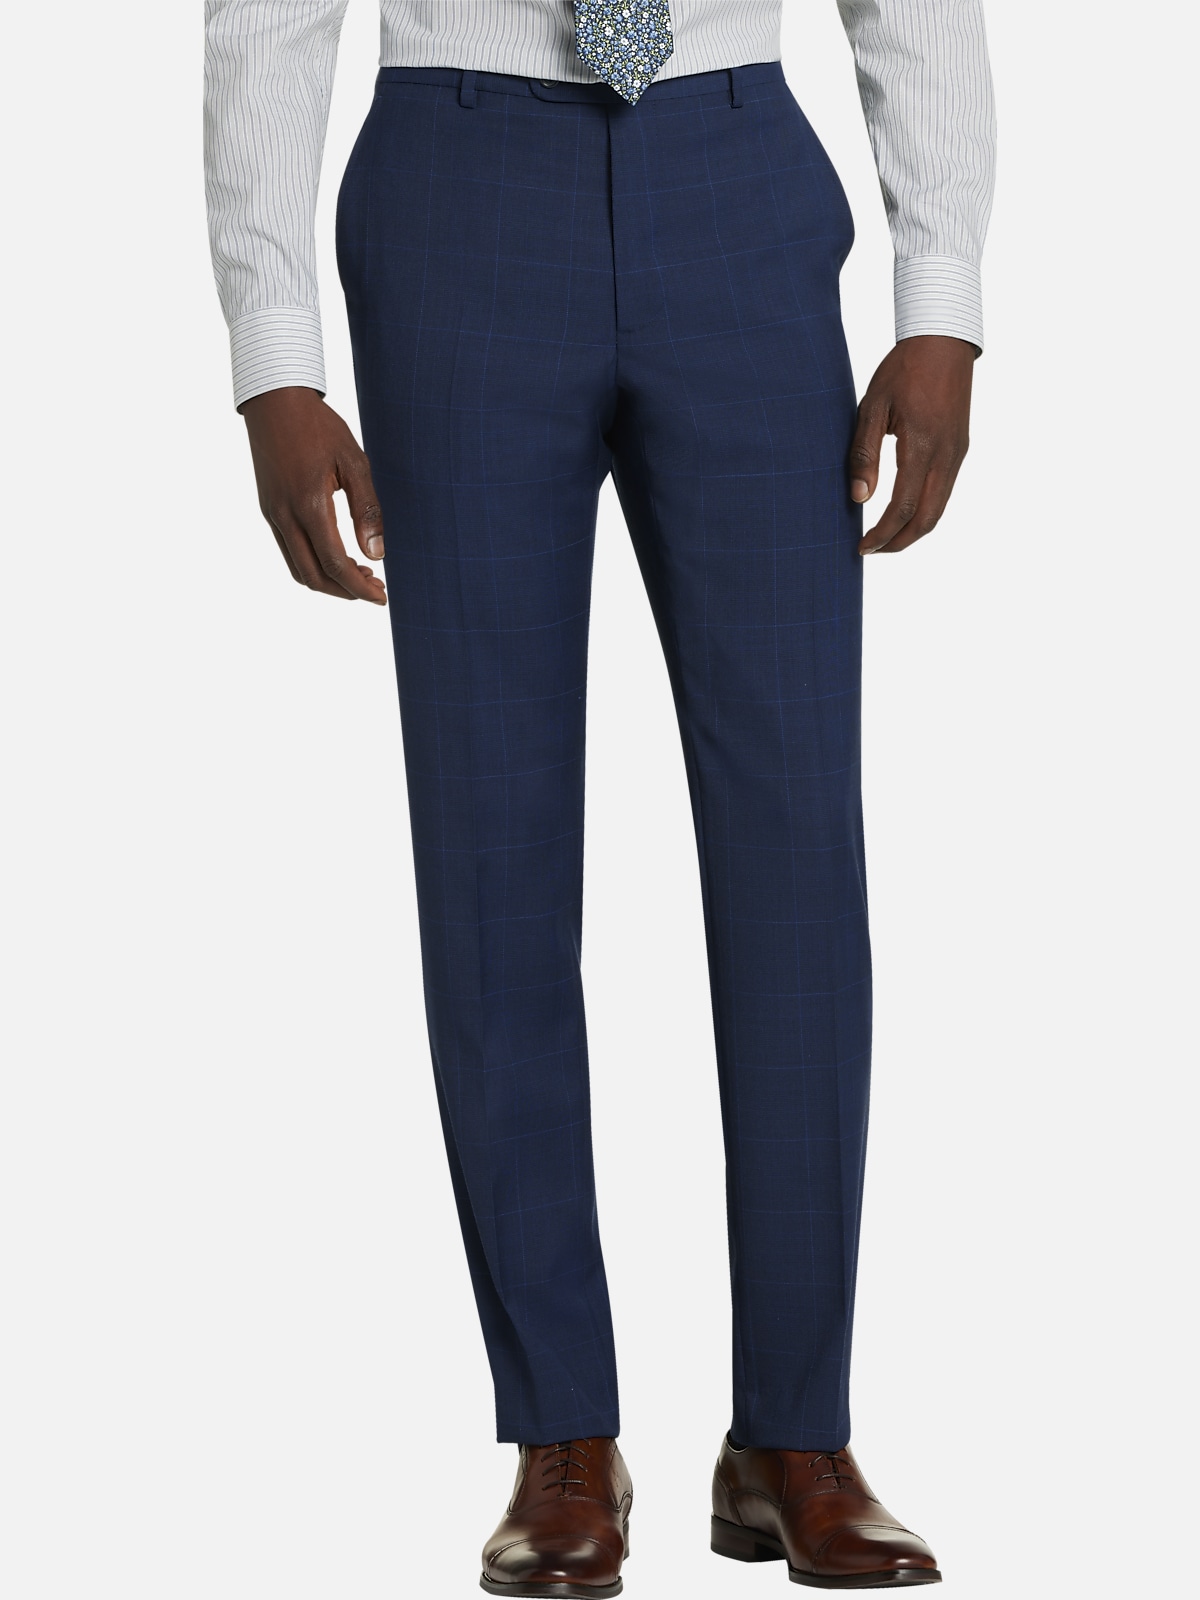 Pronto Uomo Platinum Modern Fit Suit Separates Pants | All Clearance ...